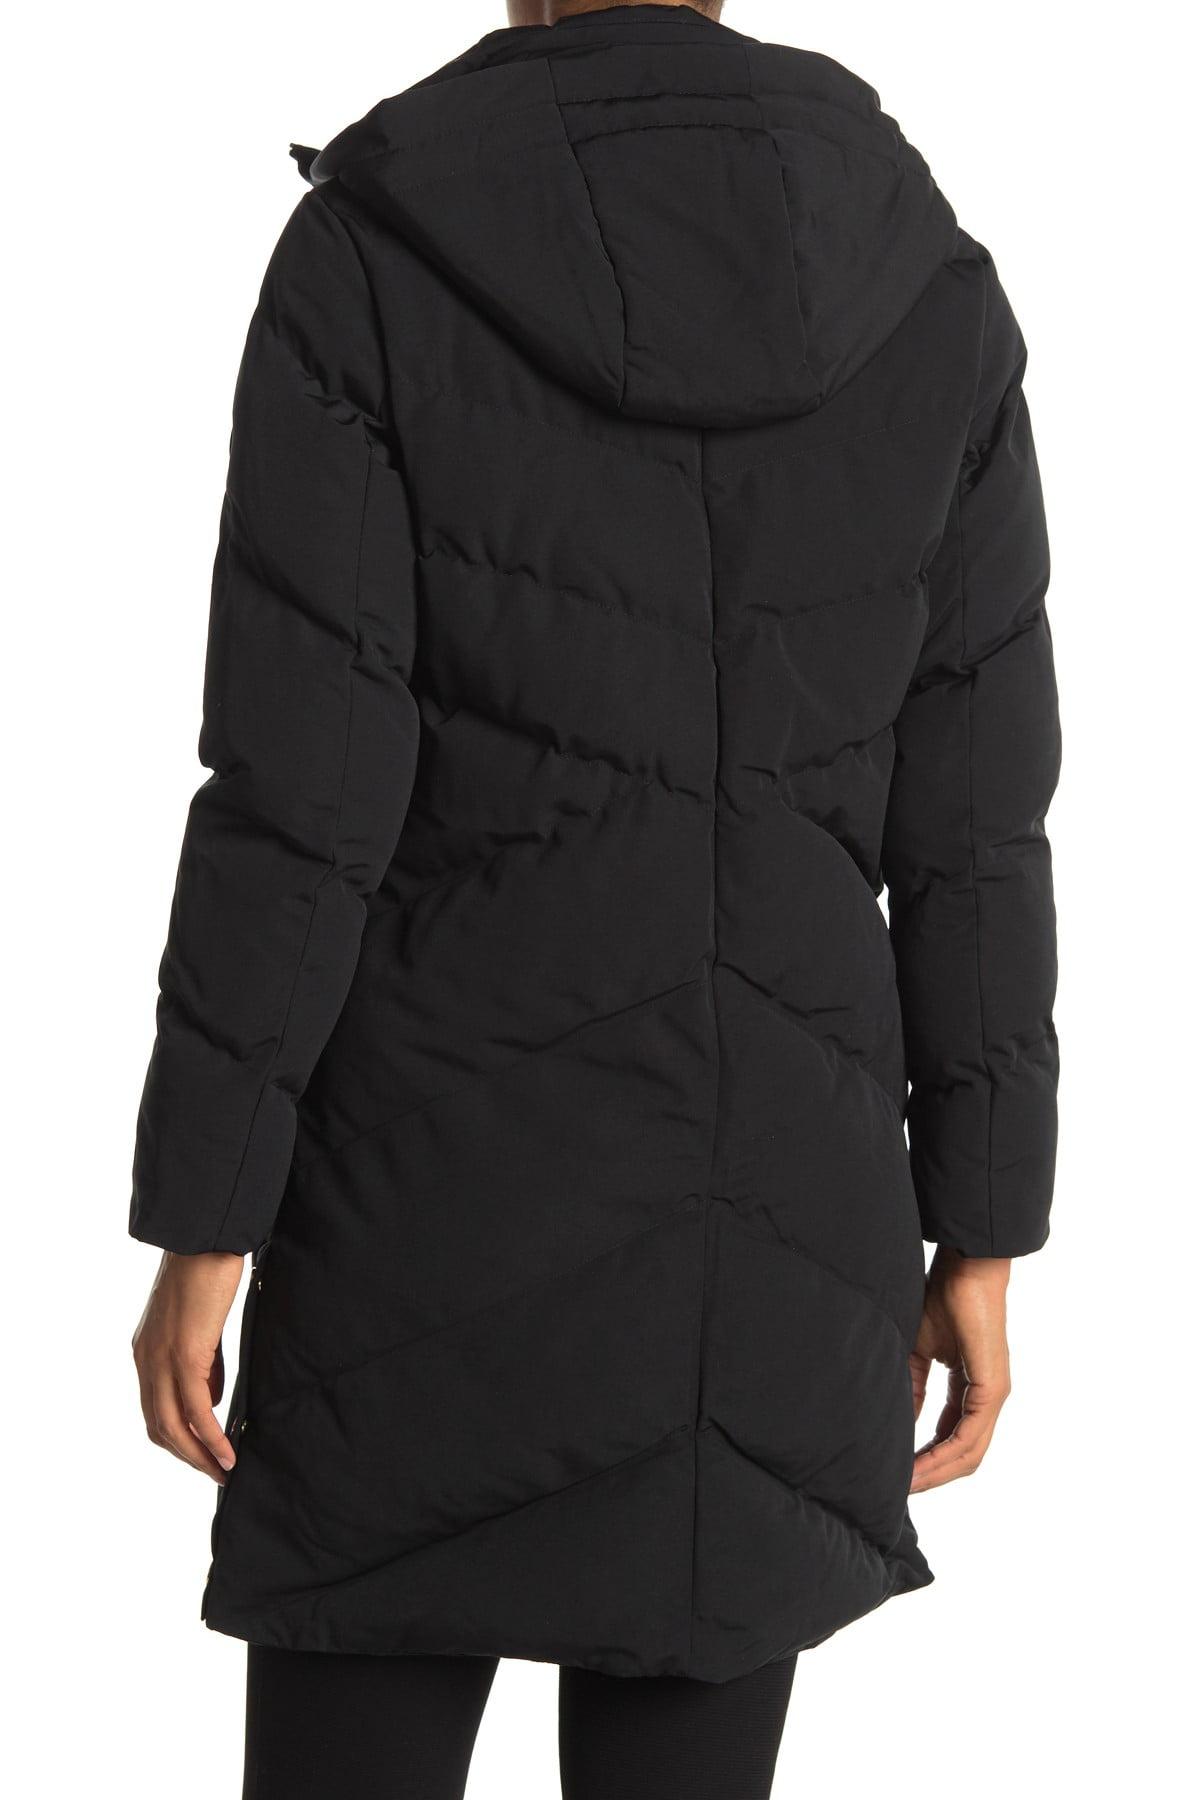 French Connection Synthetic Hooded Long Puffer Jacket in Black - Lyst